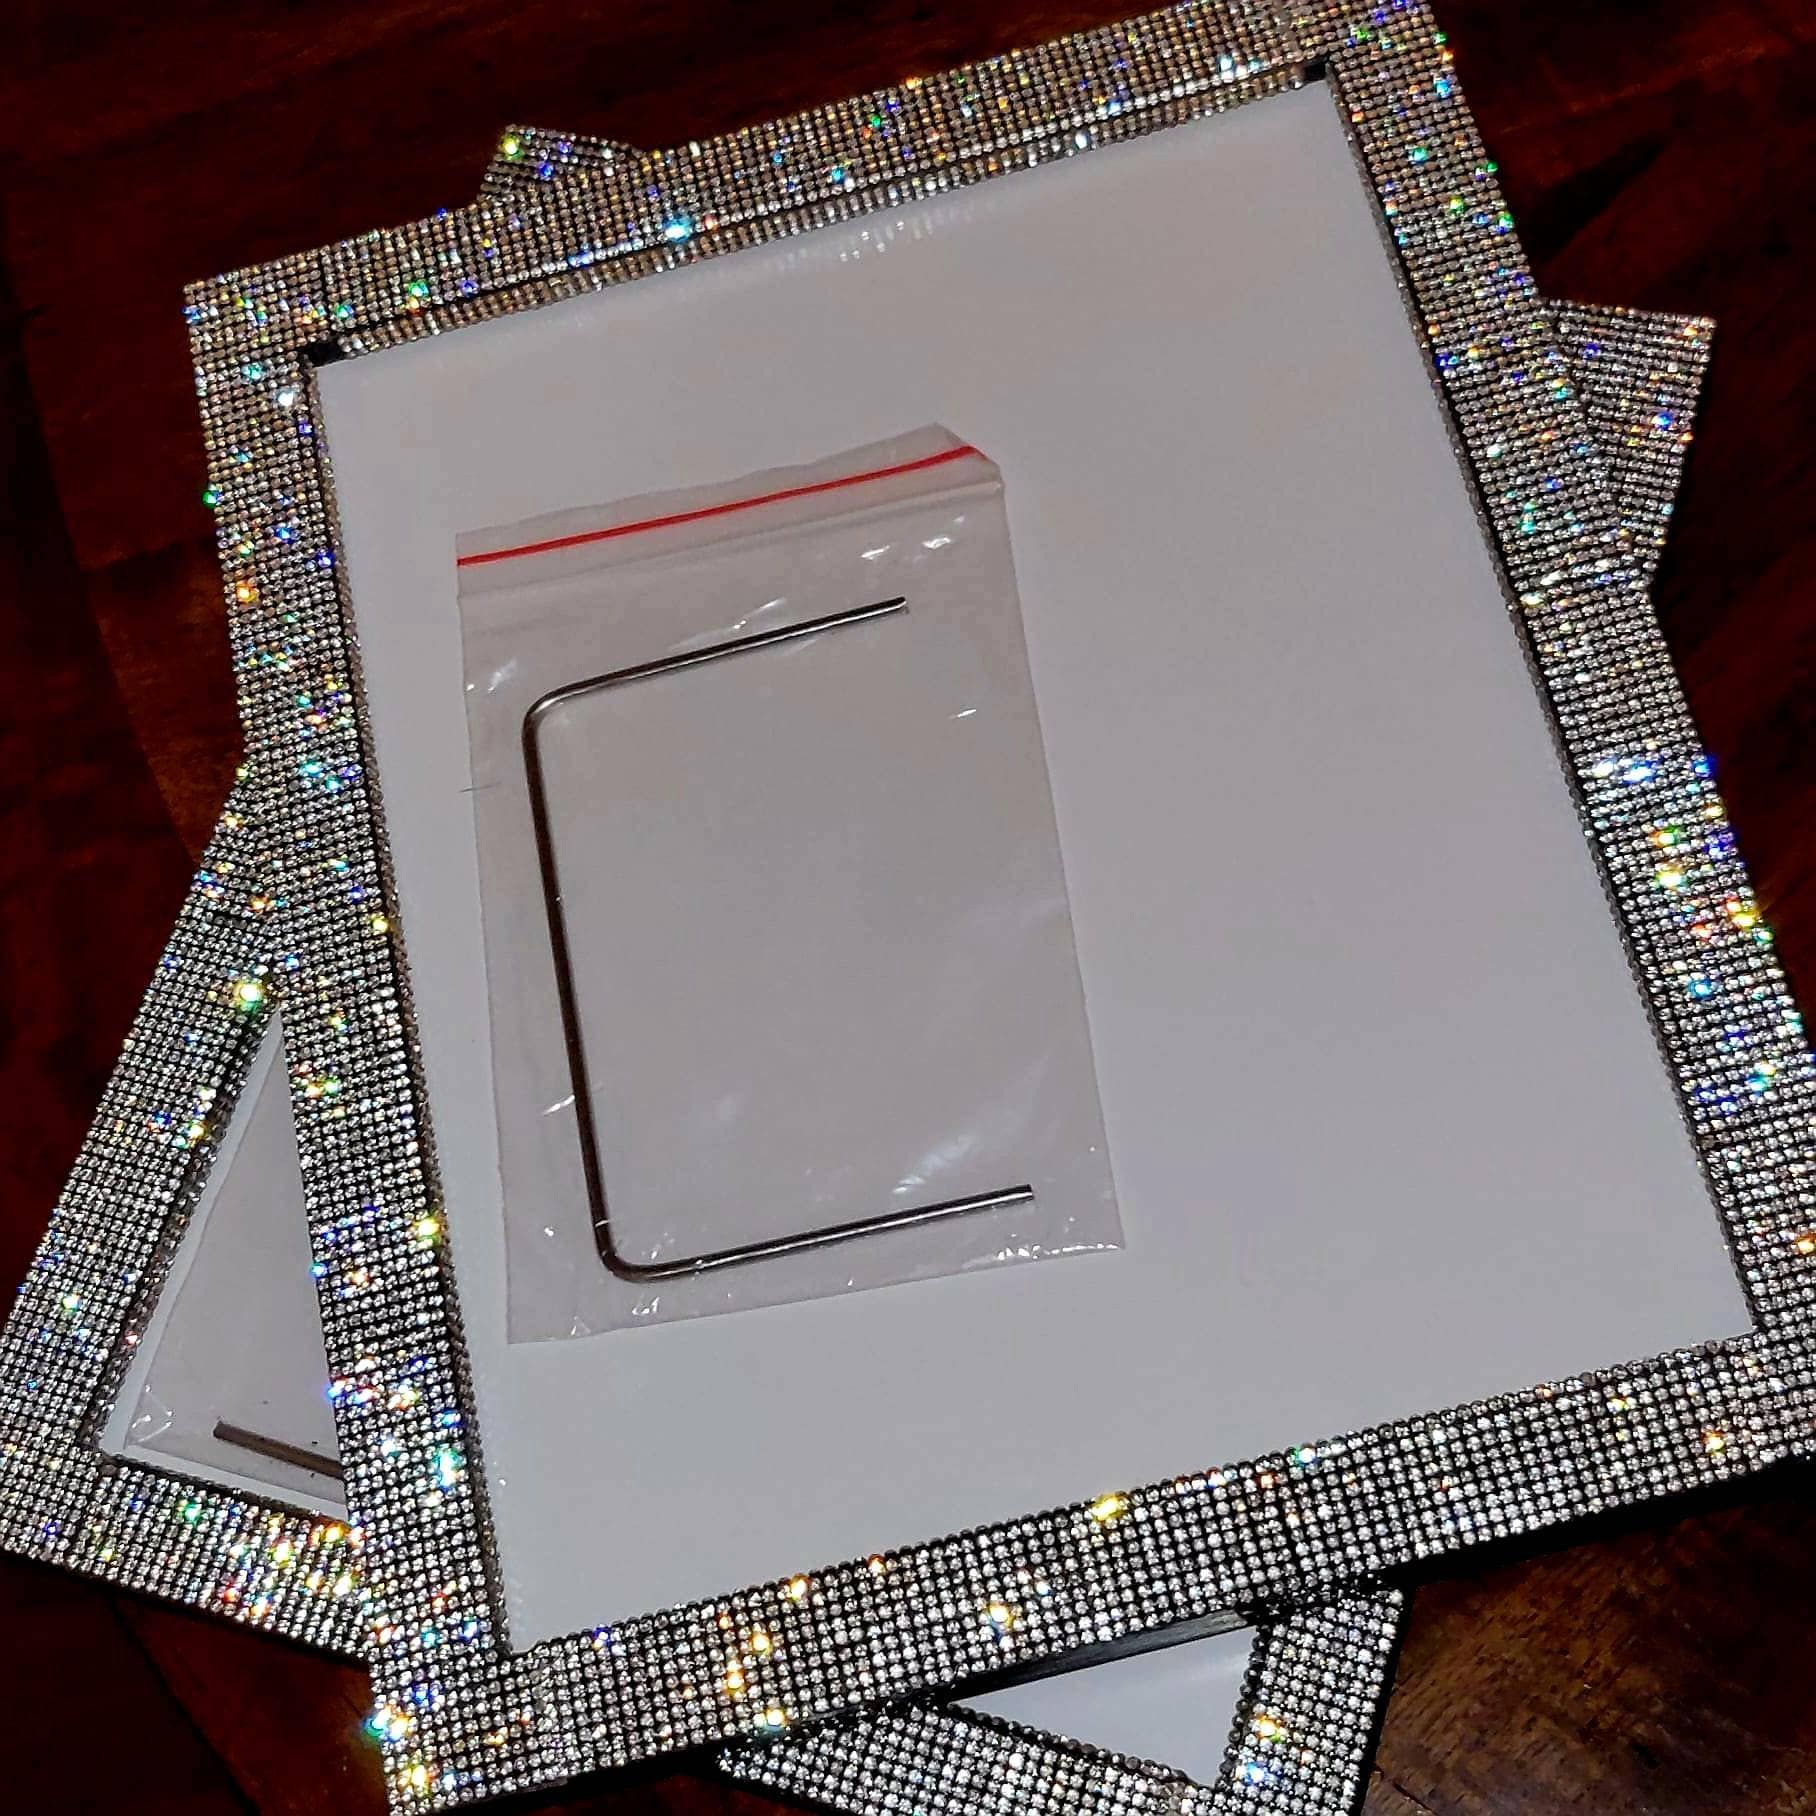 Calenzana 8x10 Picture Frame Sparkle Glass Photo Frames for Tabletop, 8 x  10 inch, 2 Pack